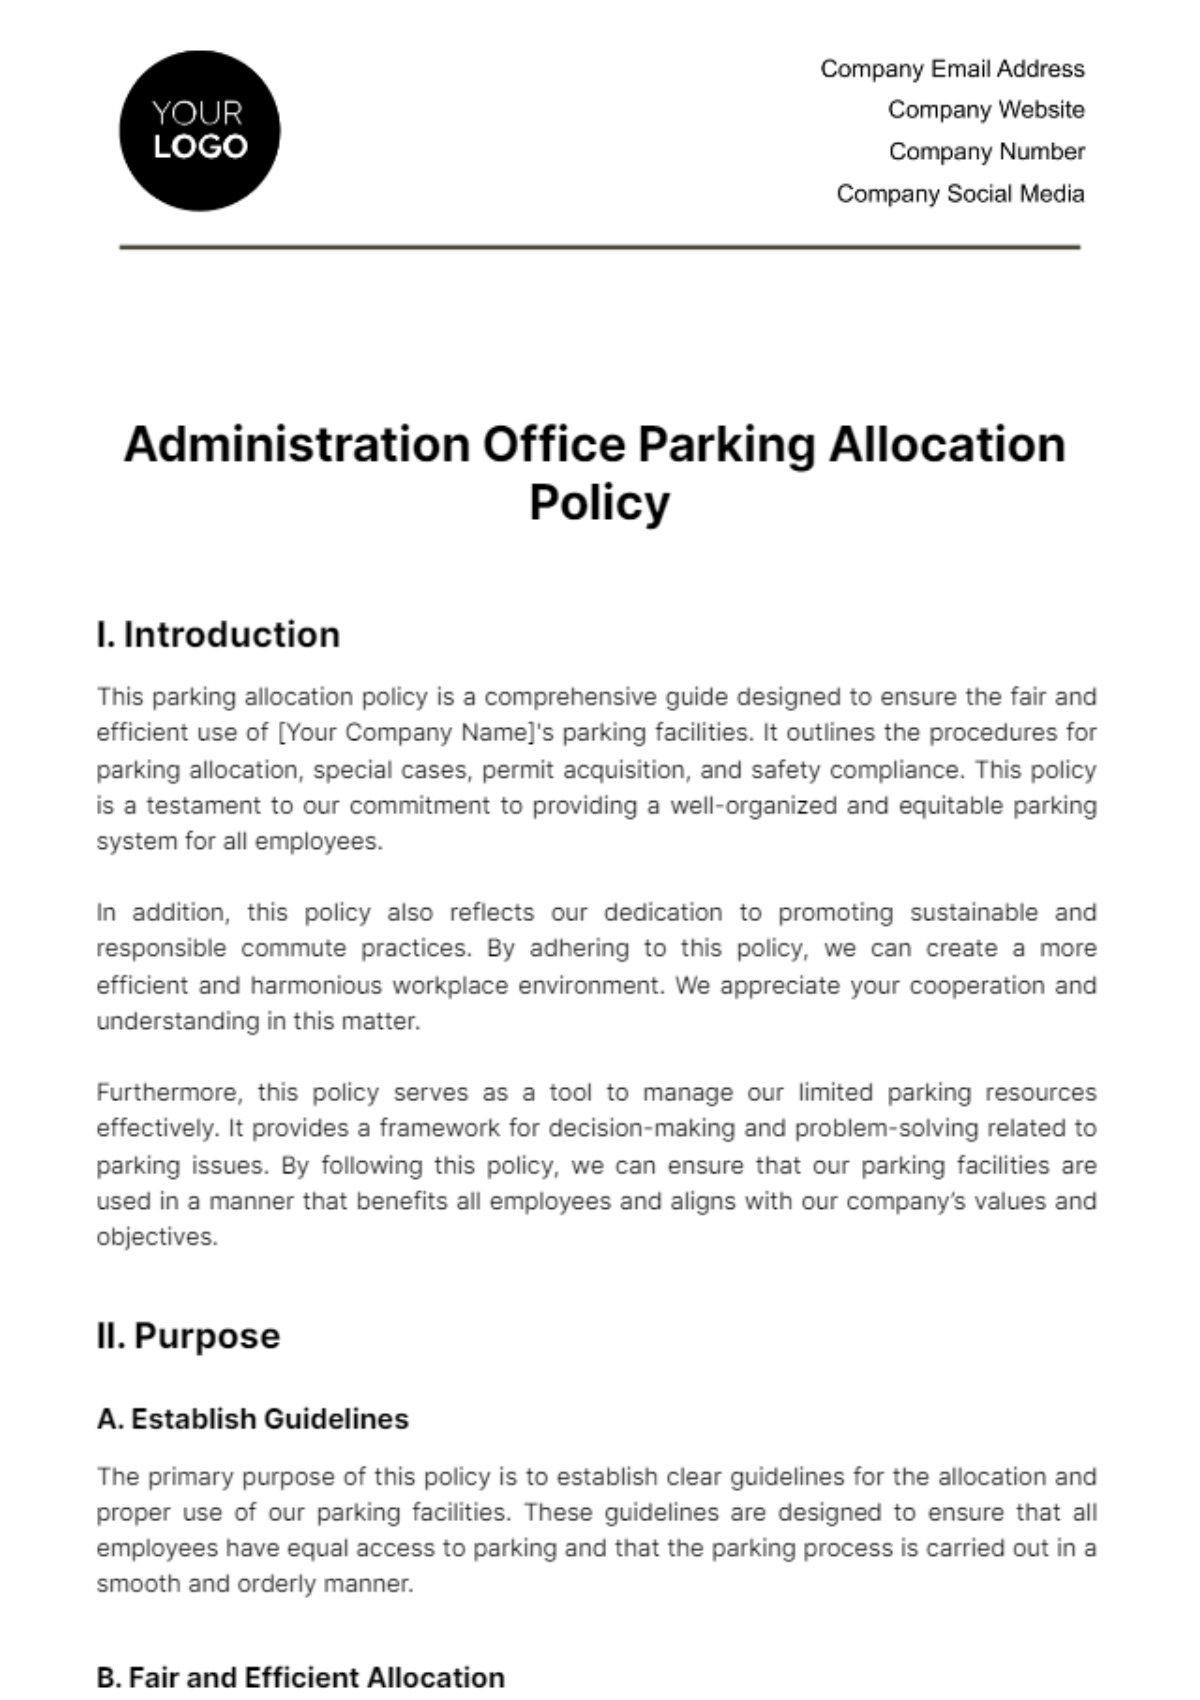 Free Administration Office Parking Allocation Policy Template